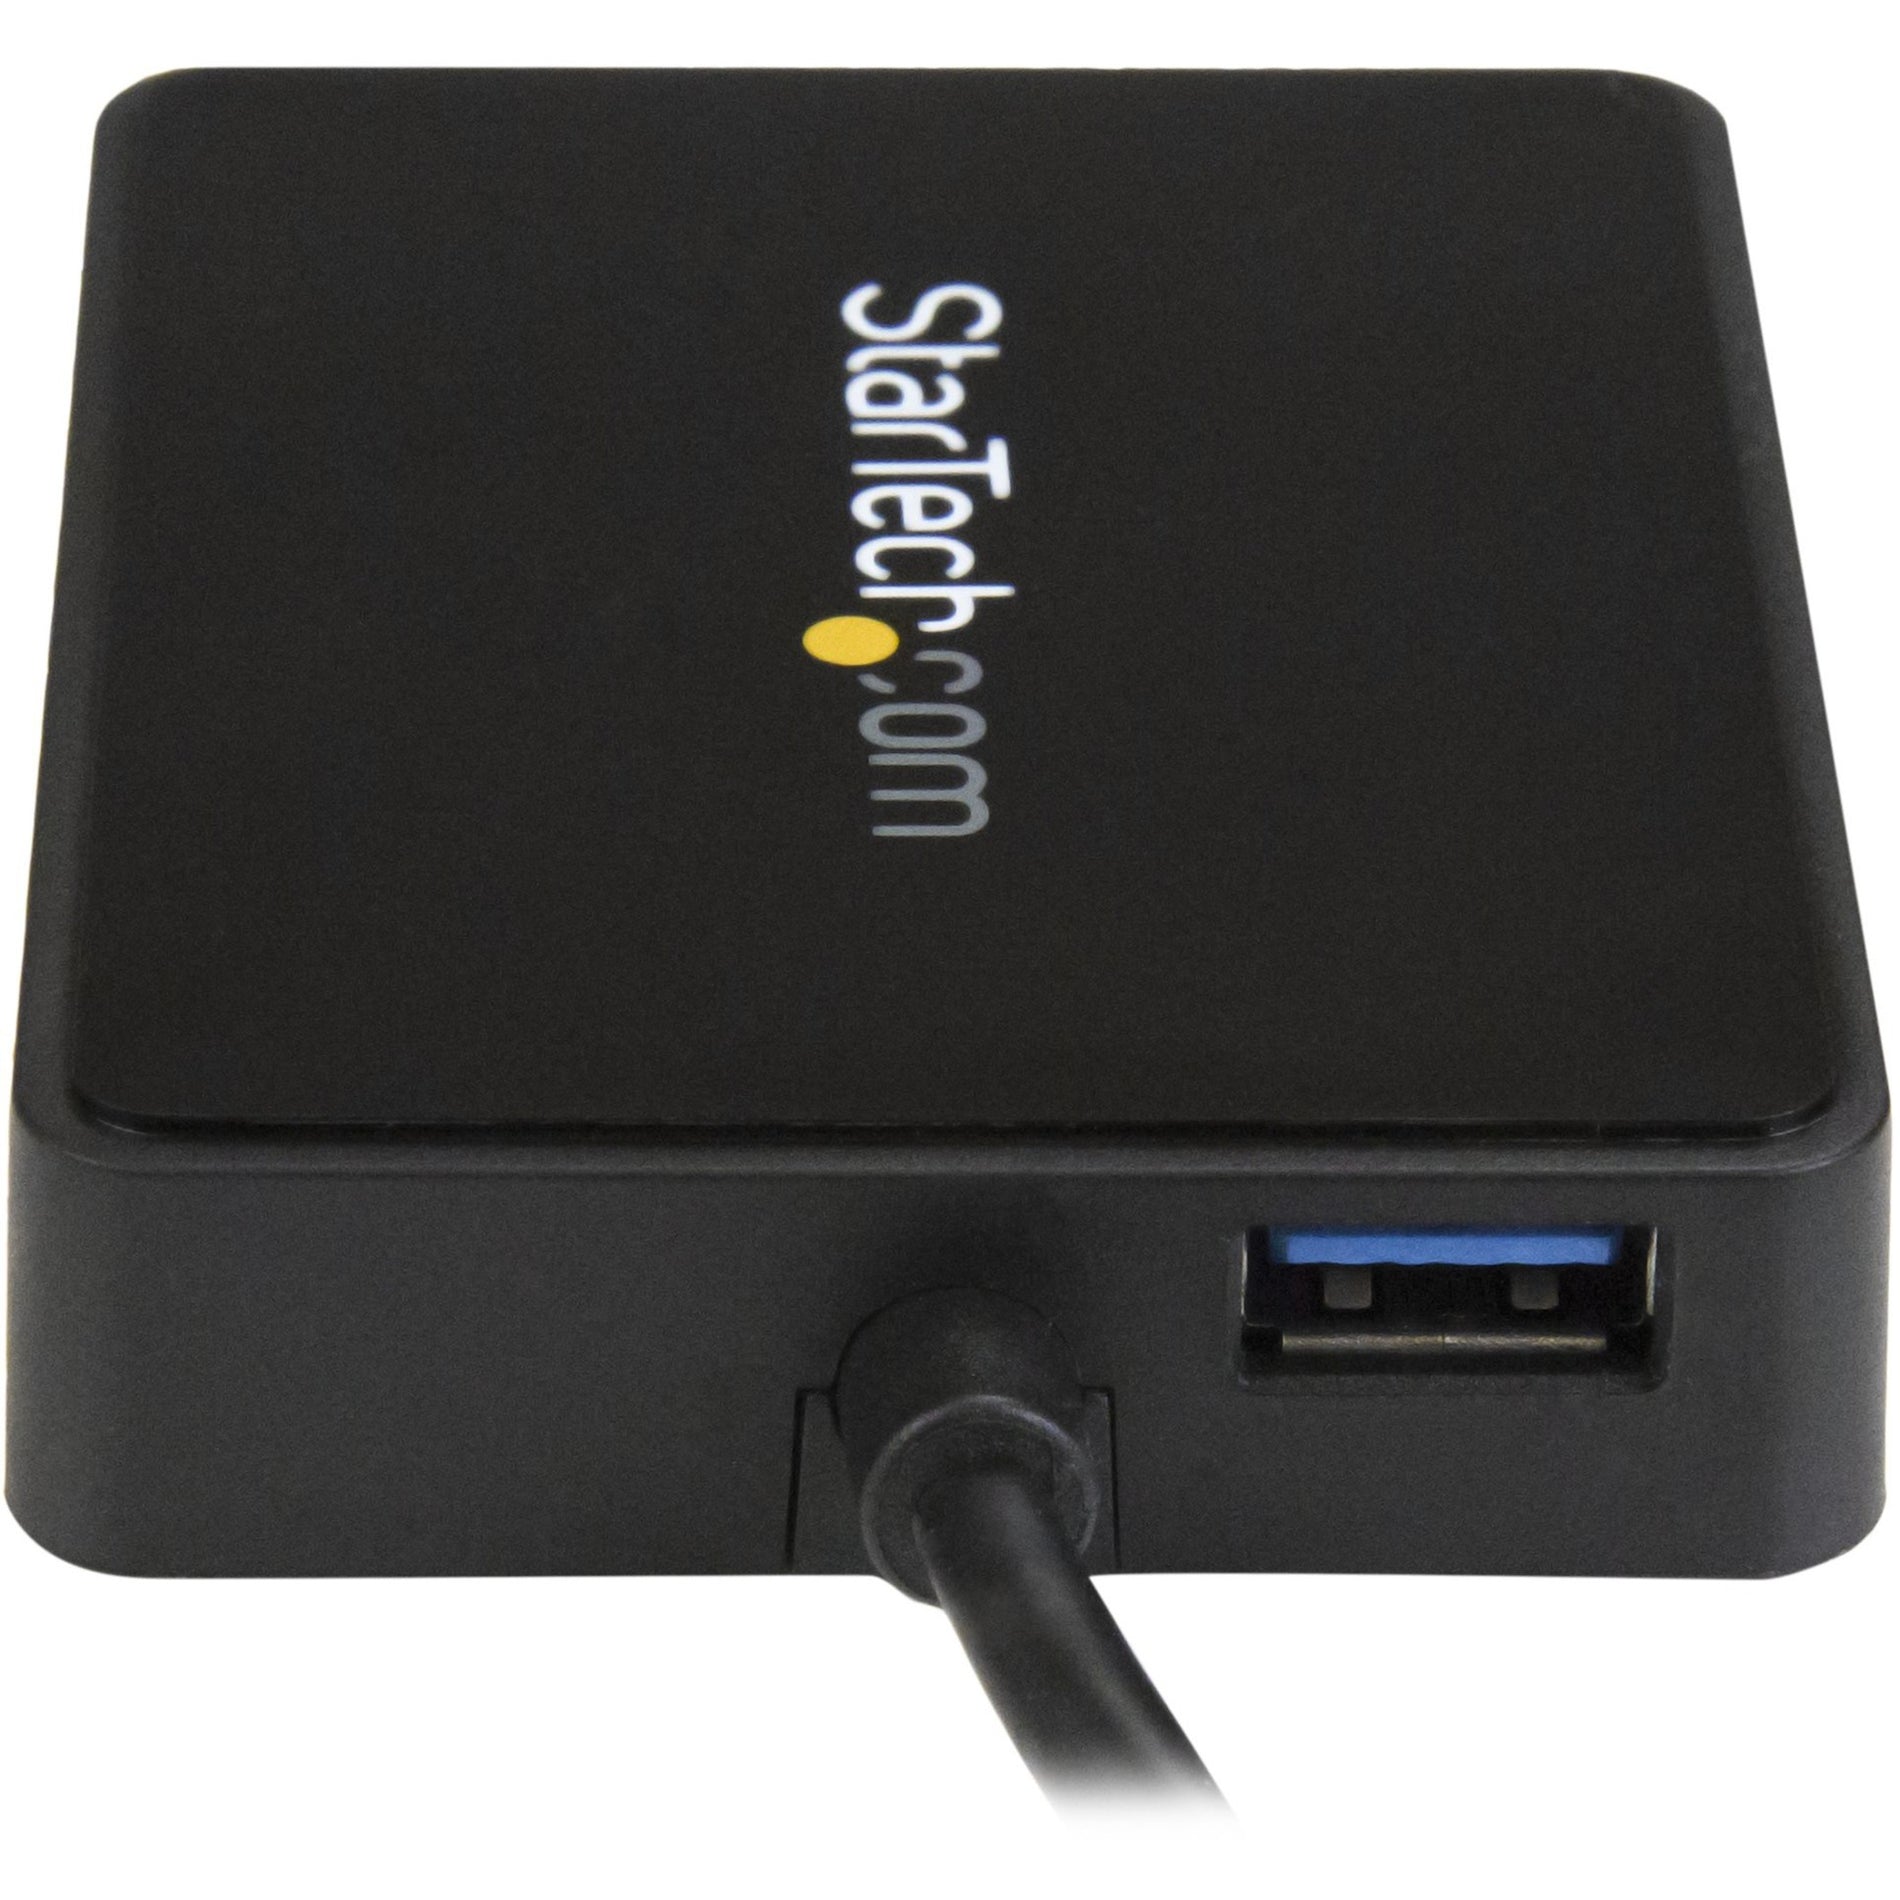 StarTech.com US1GC301AU2R USB-C to Dual Gigabit Ethernet Adapter with USB 3.0 (Type-A) Port - USB Type-C Gigabit Network Adapter, High-Speed Internet Connection for Computers/Notebooks